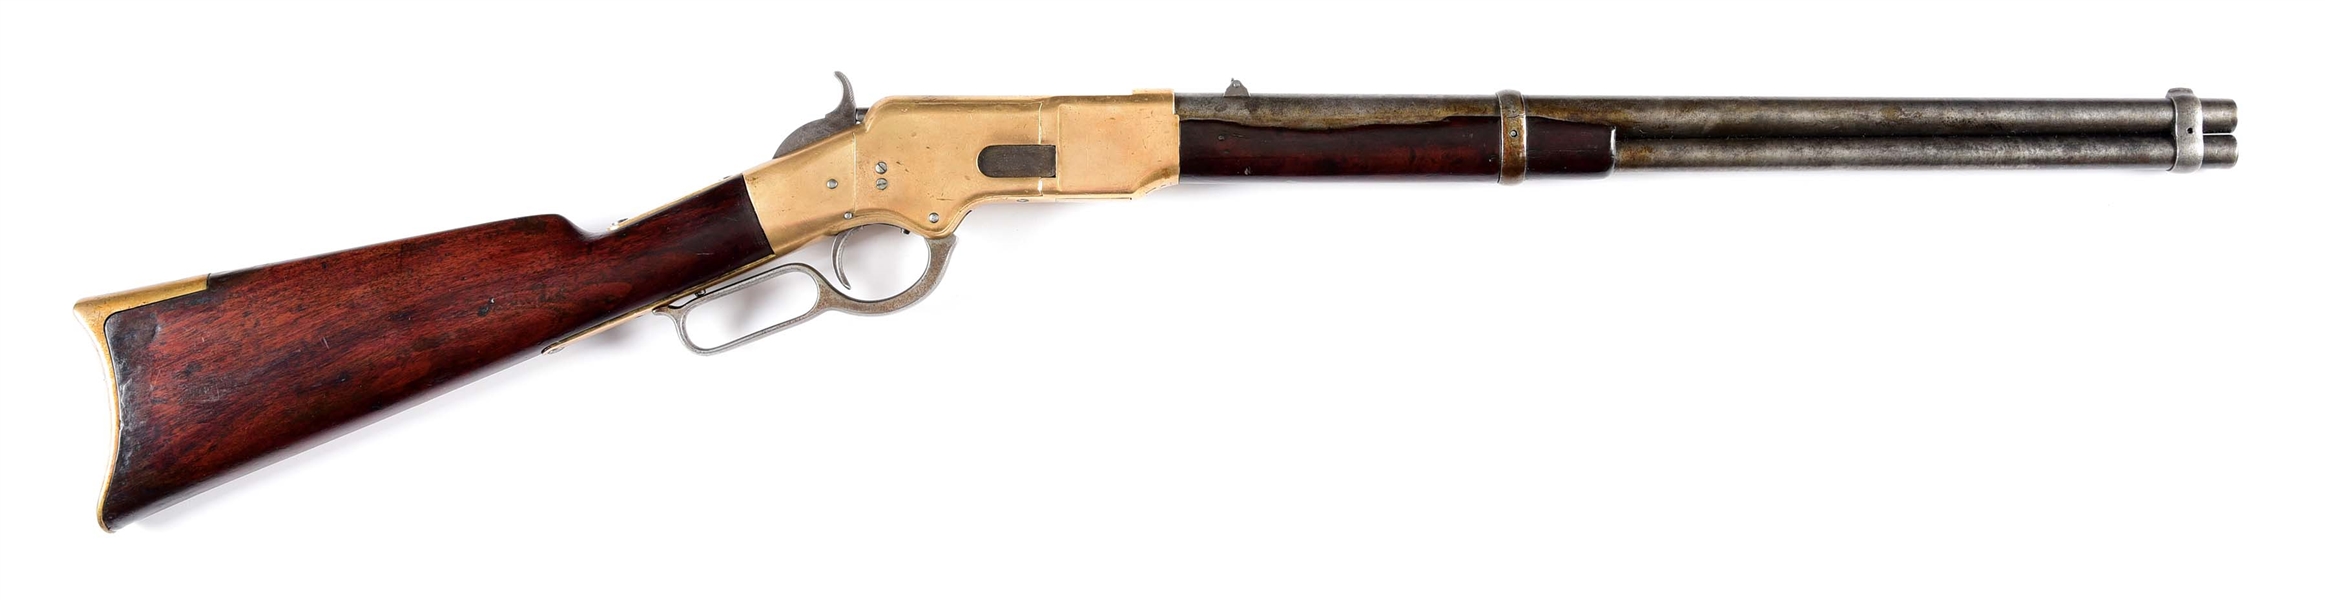 (A) EXTREMELY RARE REPUBLICA MEXICO WINCHESTER FIRST MODEL 1866 LEVER-ACTION CARBINE.